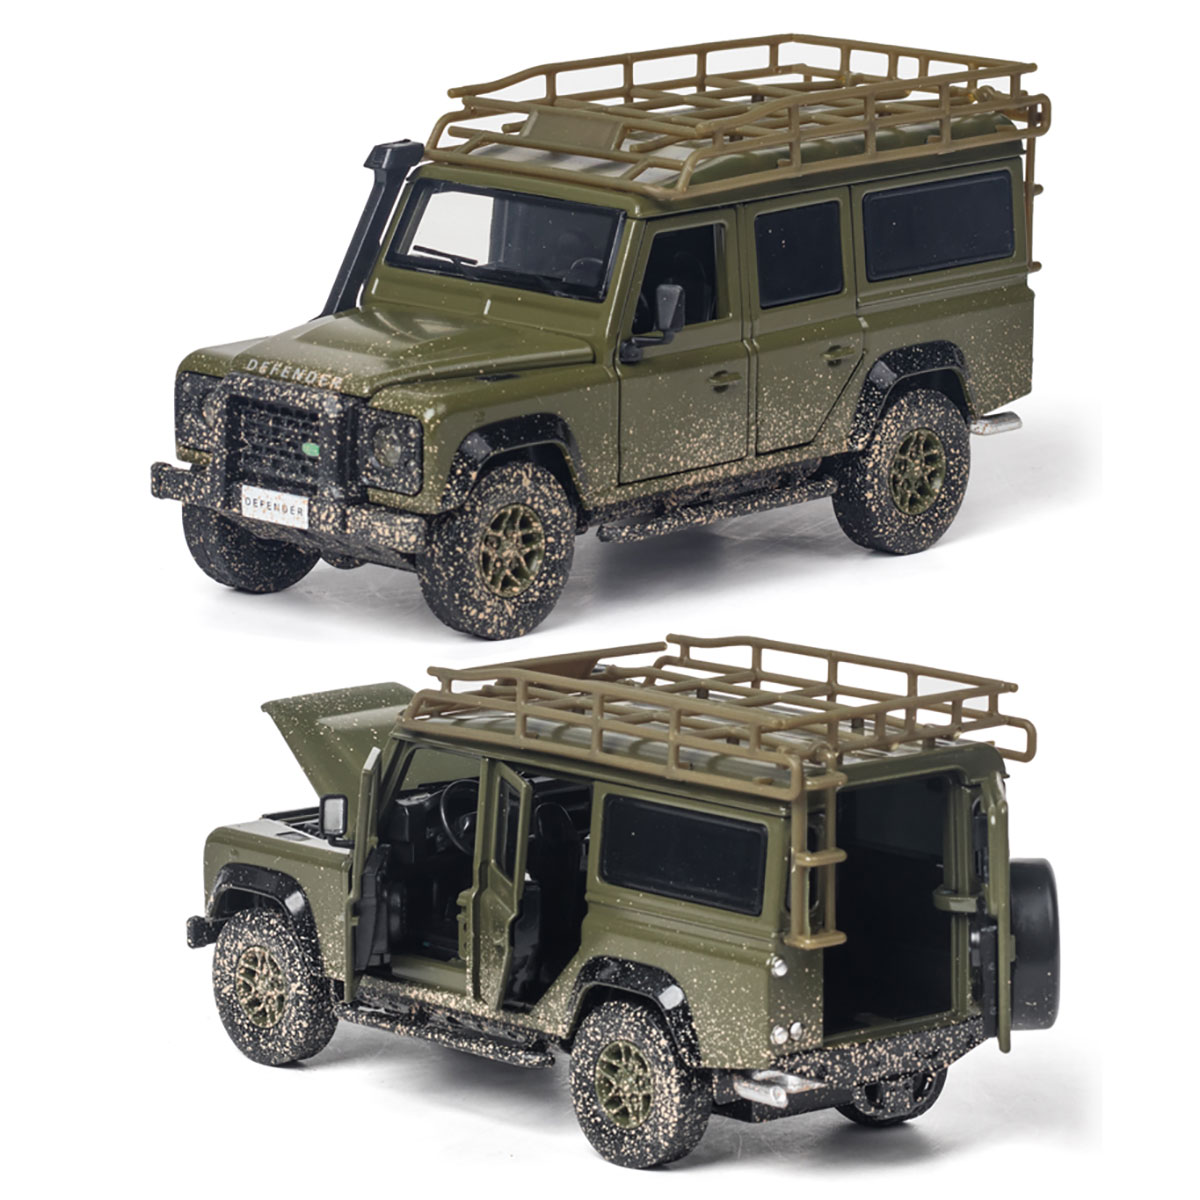 132-Alloy-Land-Rovers-Defenders-Rear-Wheel-Pull-Back-Diecast-Car-Model-Toy-with-Sound-Light-for-Gift-1722618-10